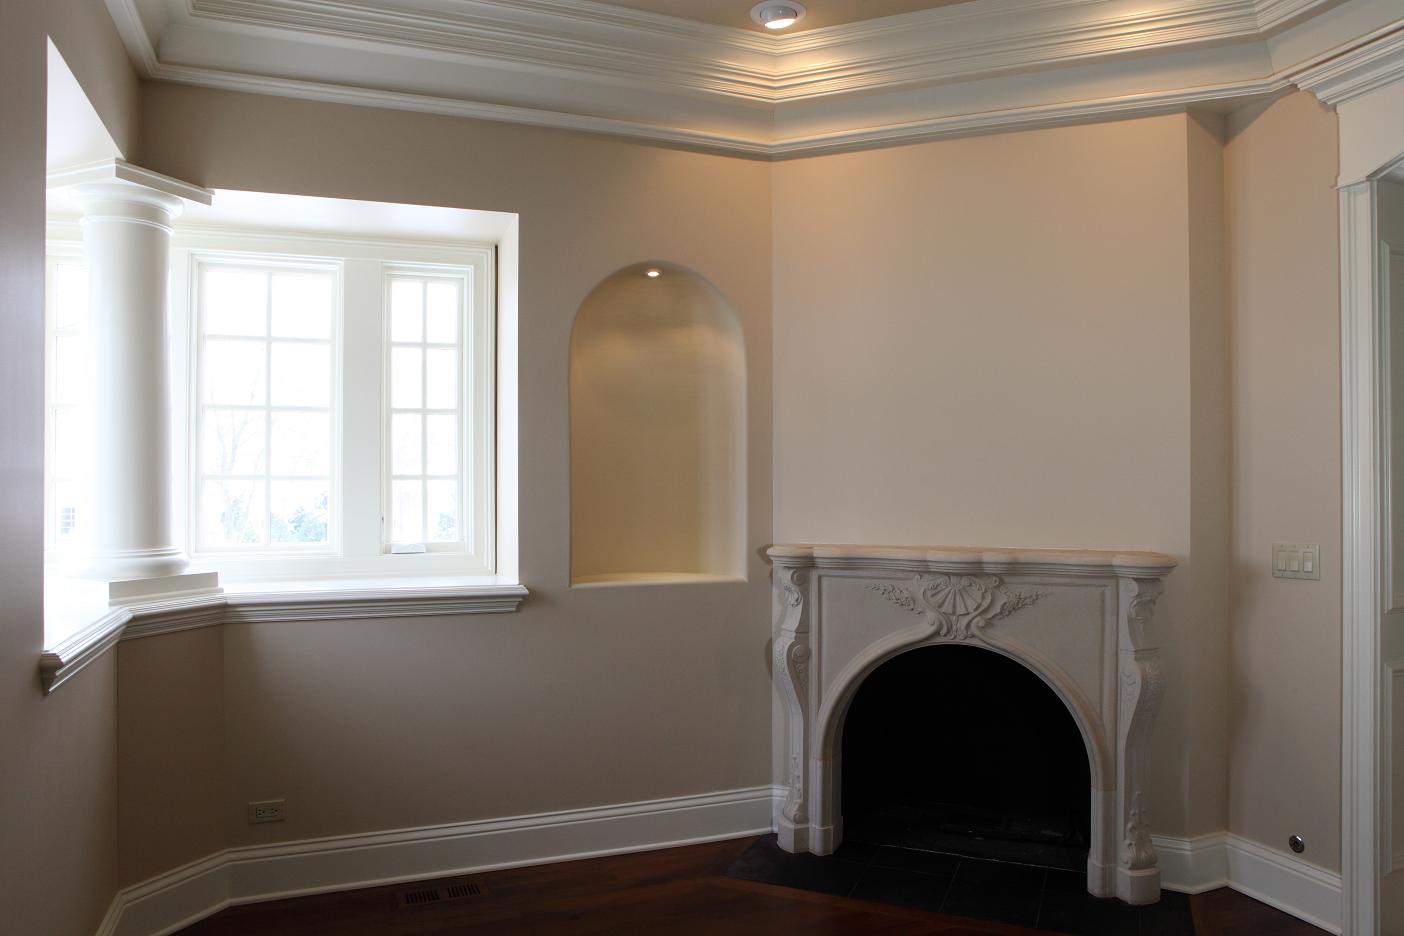 cream wall design with white accent and flat crown molding idea with glass wall and arched fireplace